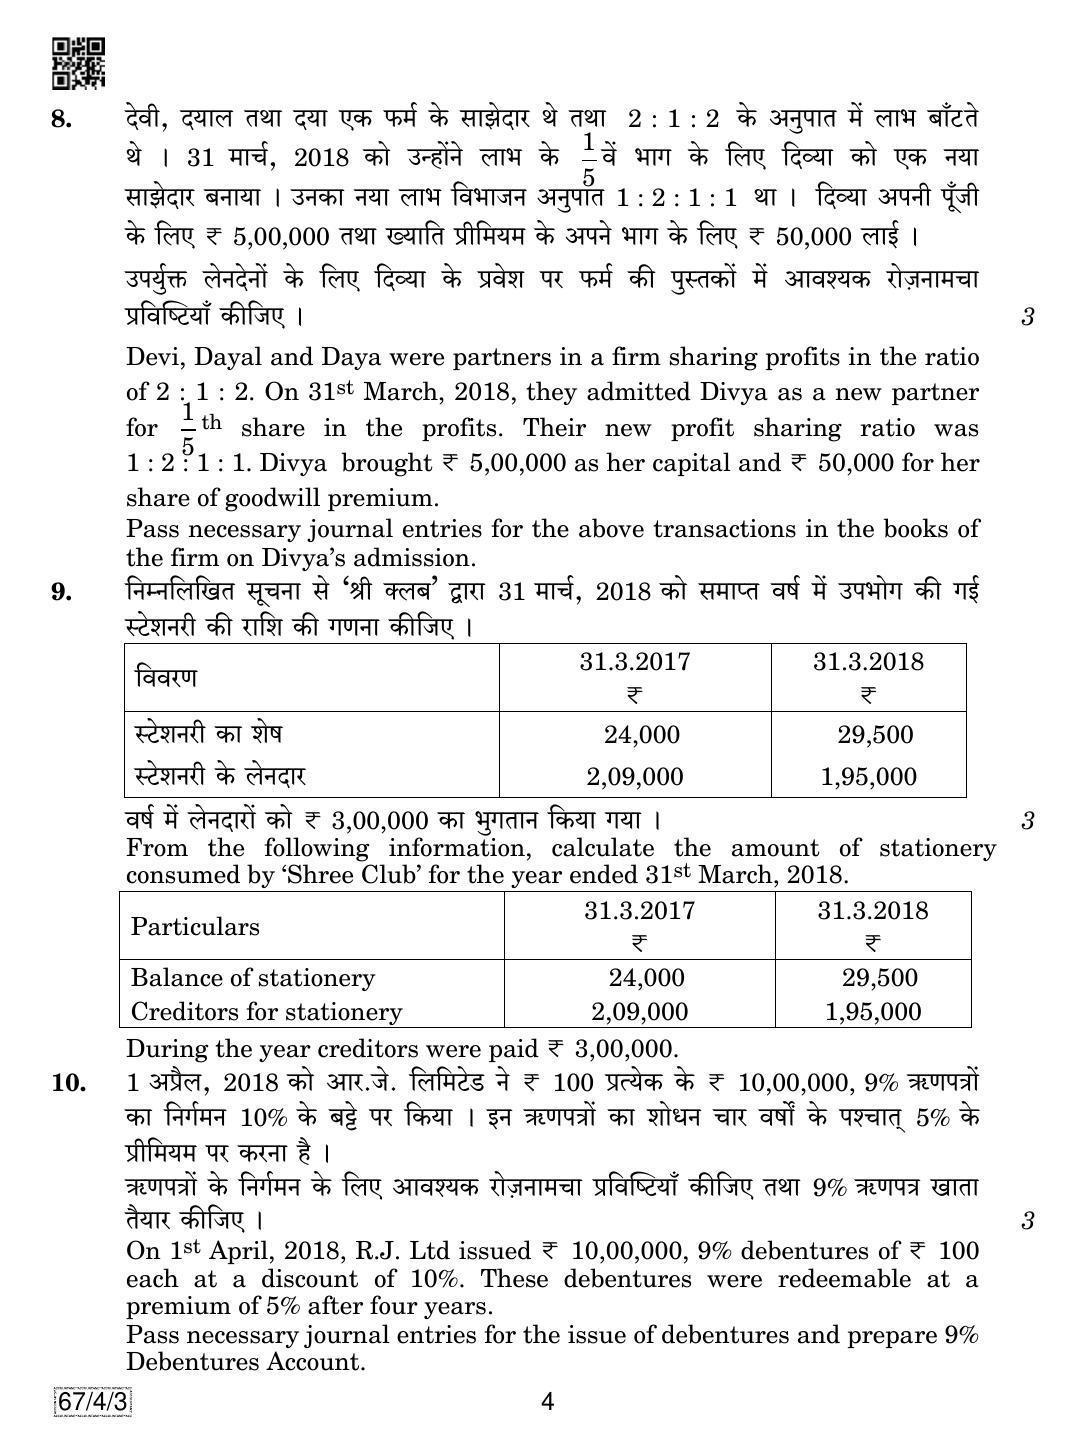 CBSE Class 12 67-4-3 Accountancy 2019 Question Paper - Page 4